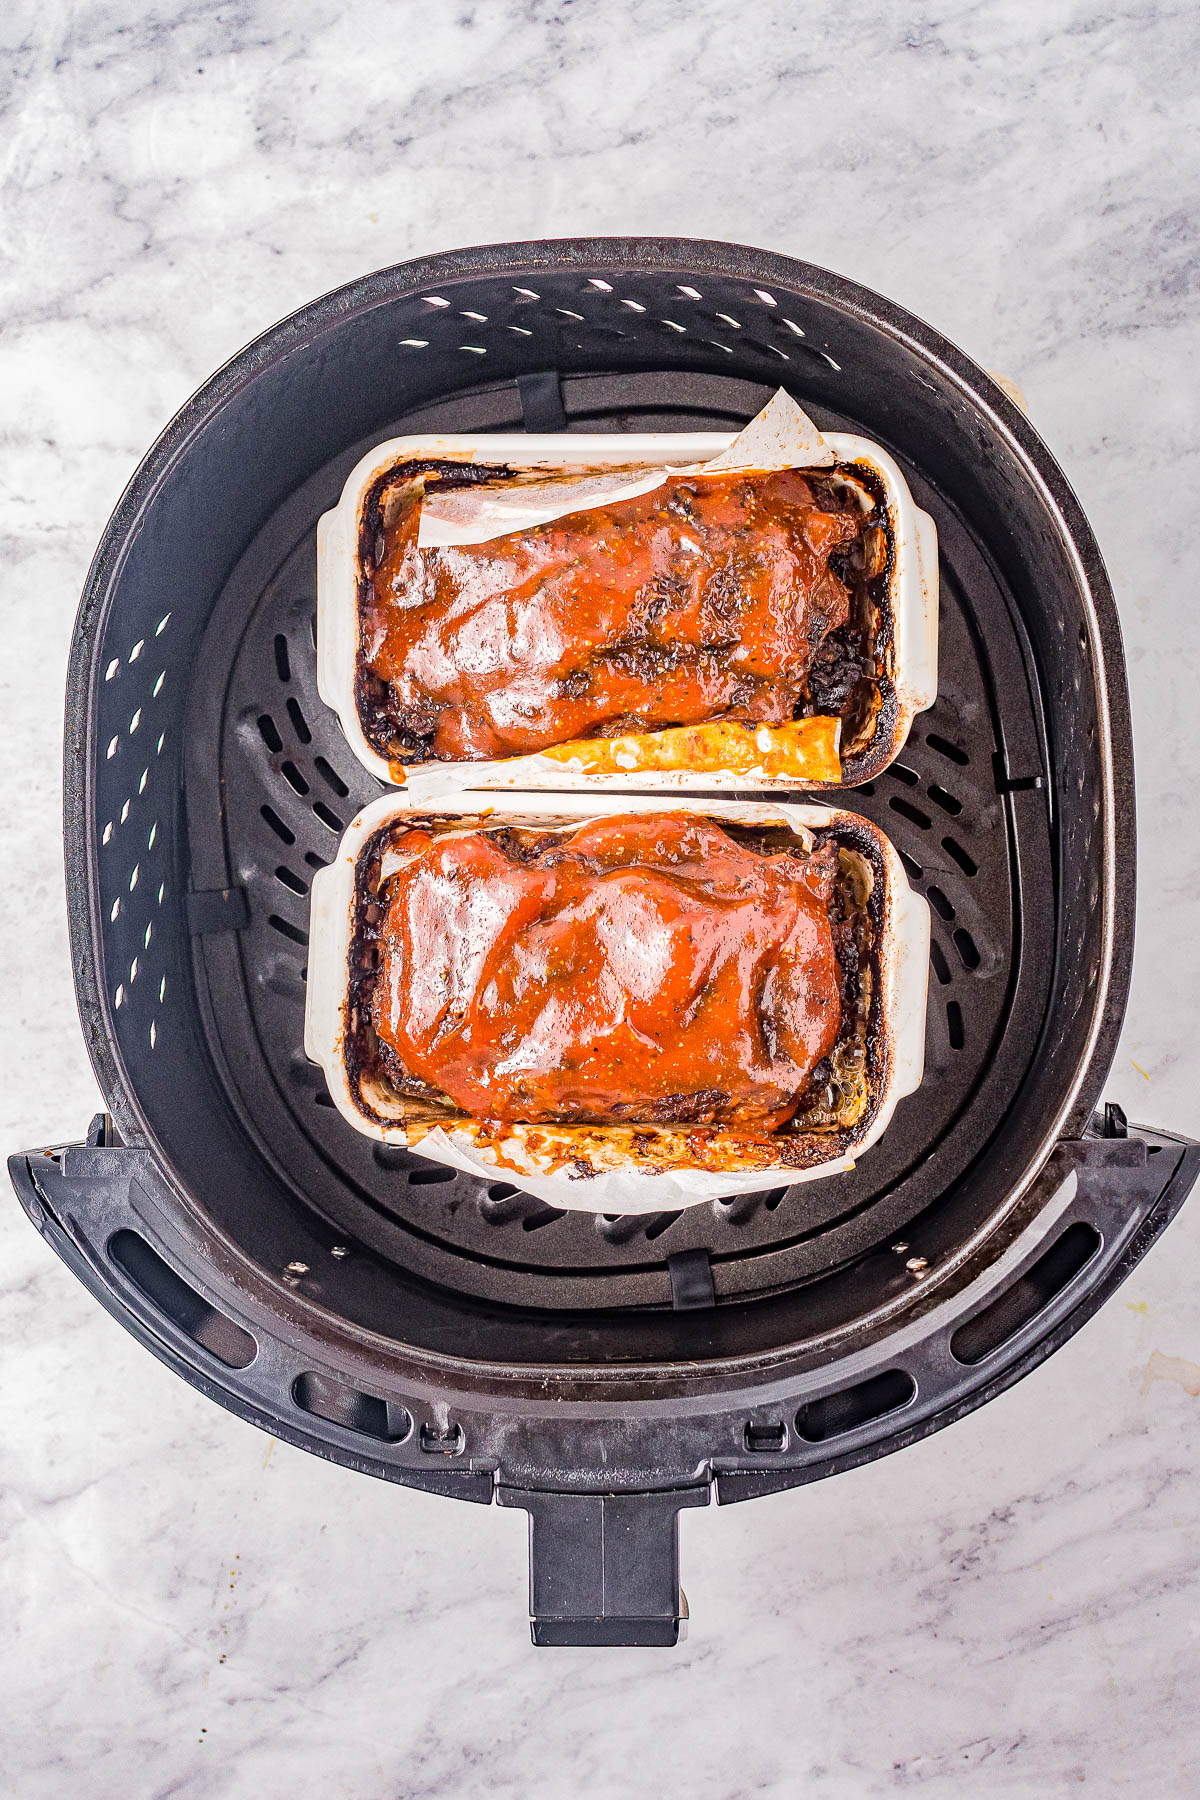 Cracker Barrel Meatloaf – This Cracker Barrel meatloaf copycat is tender, juicy, made with the restaurant’s secret ingredients, glazed to tangy-sweet perfection, and sure to become a family FAVORITE comfort food dinner recipe! Air fryer AND oven baking options provided.